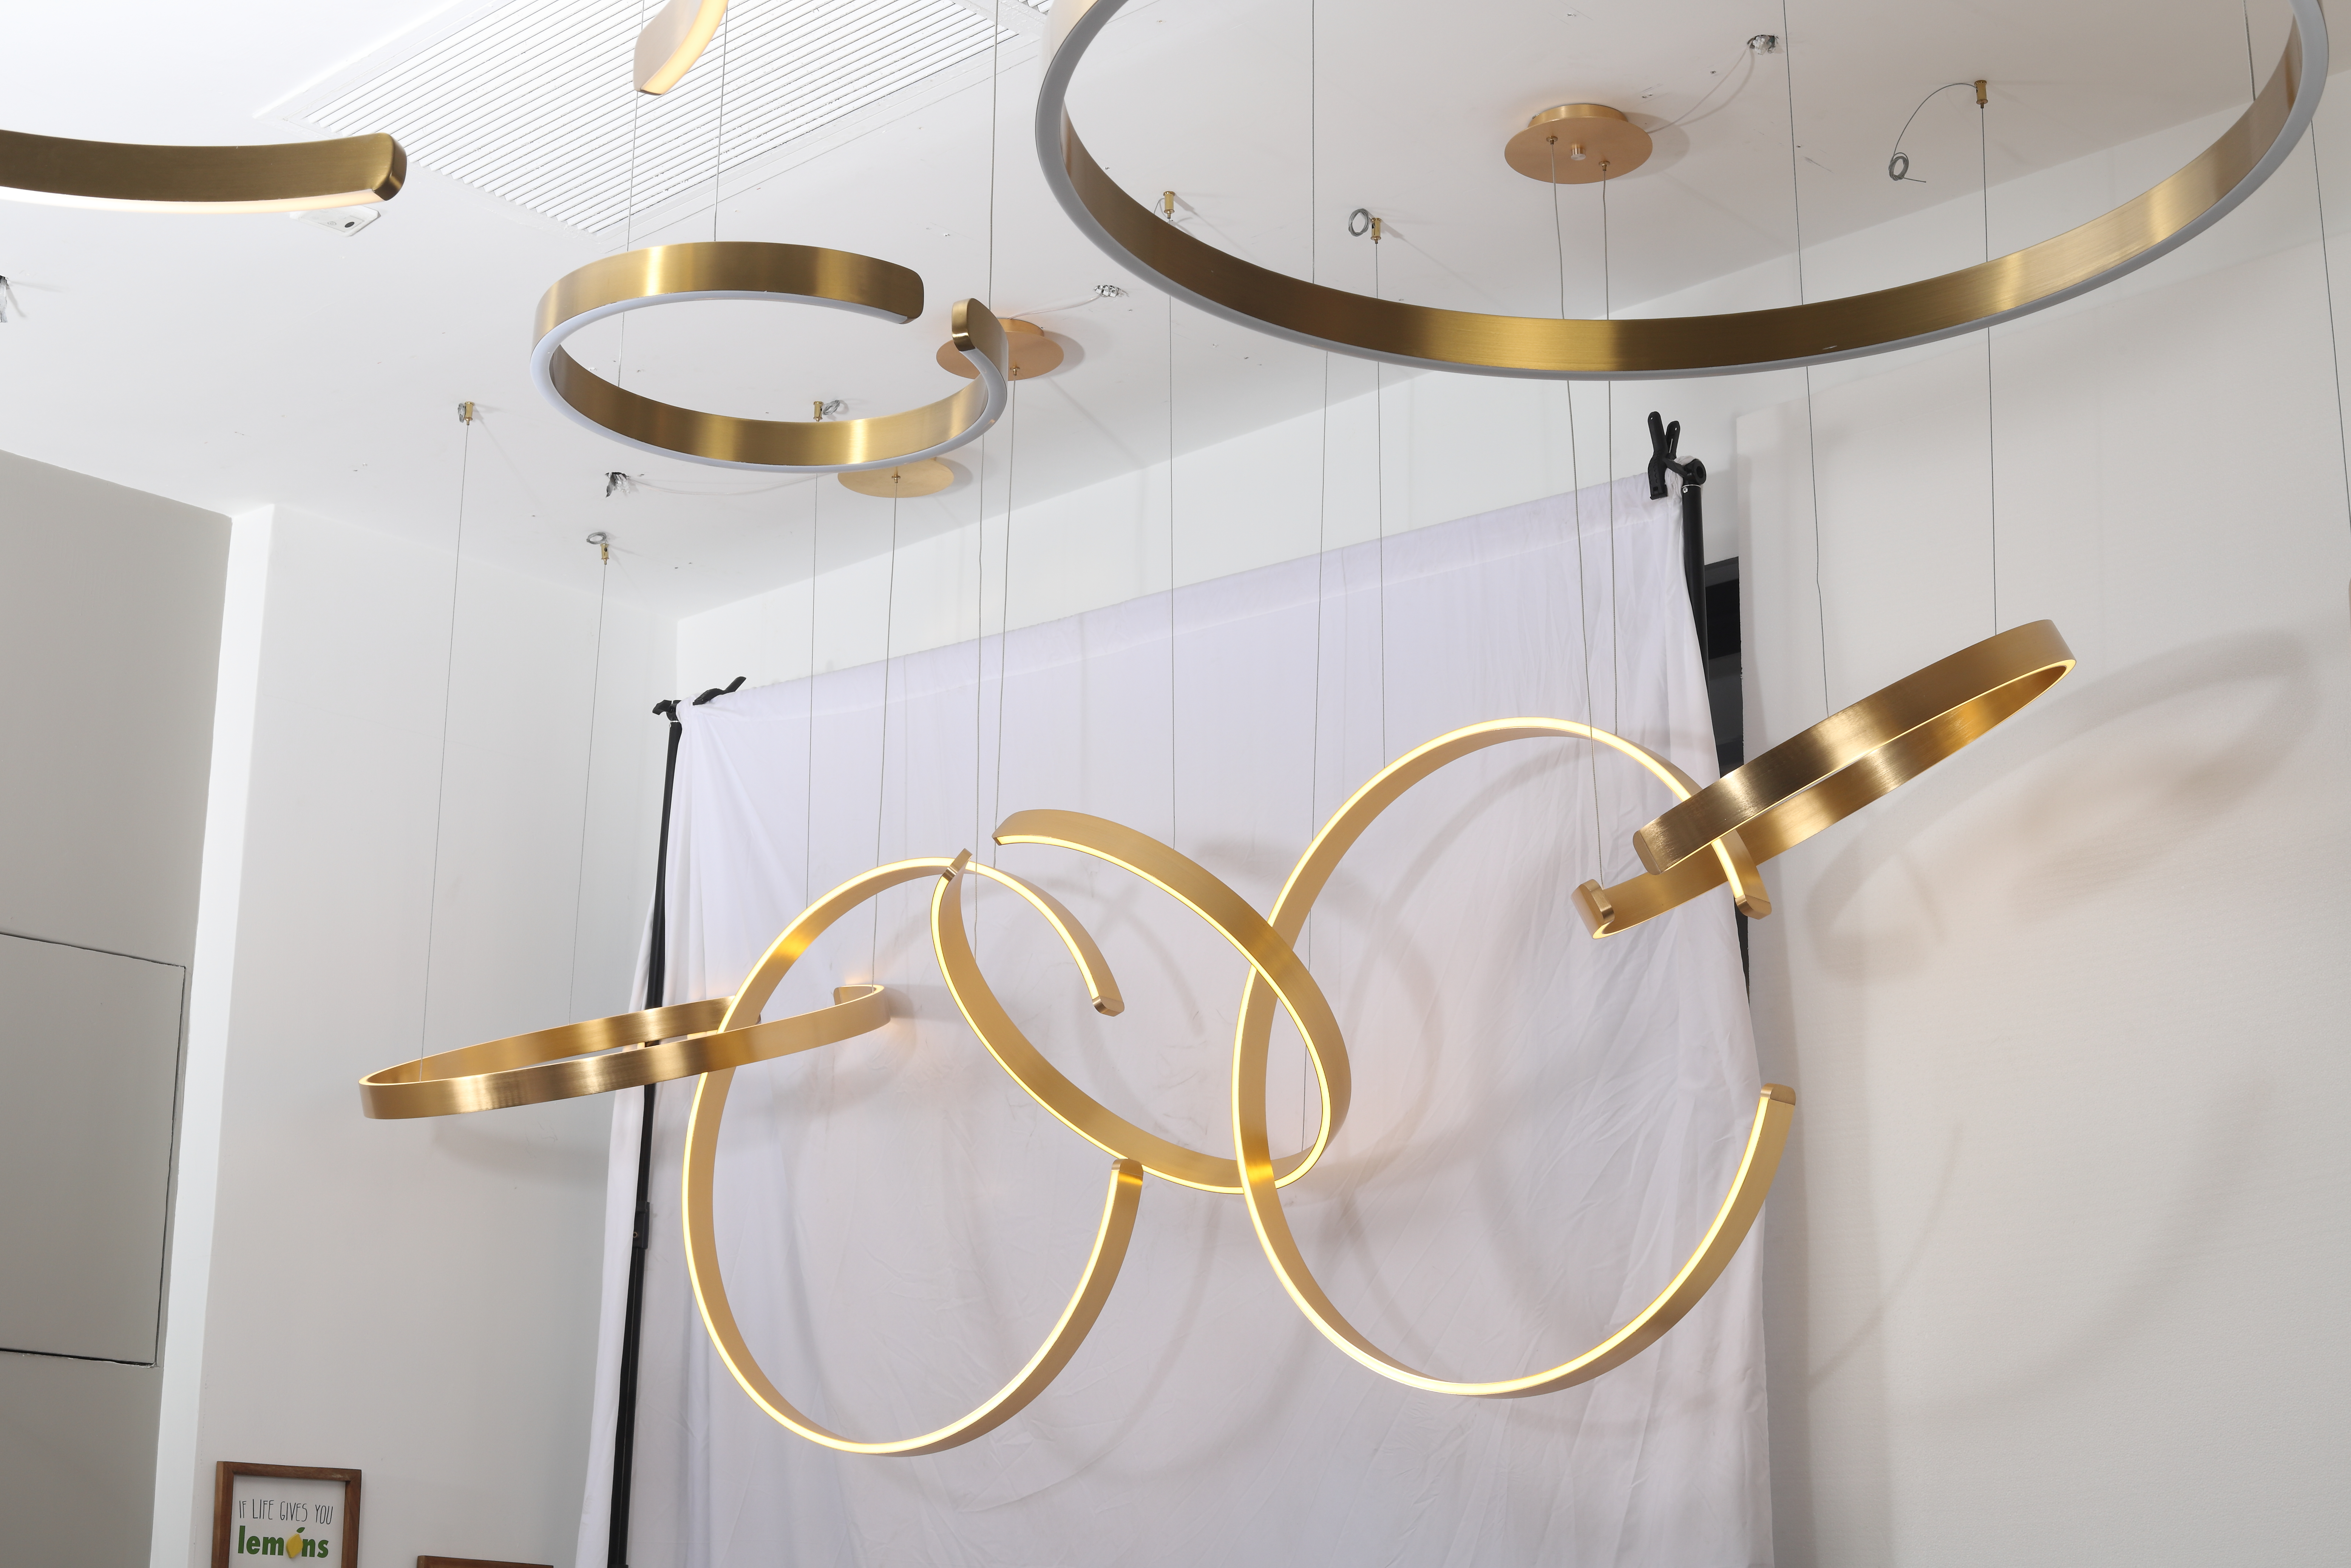 Combined up-and-down luminous horizontal annular chandelier